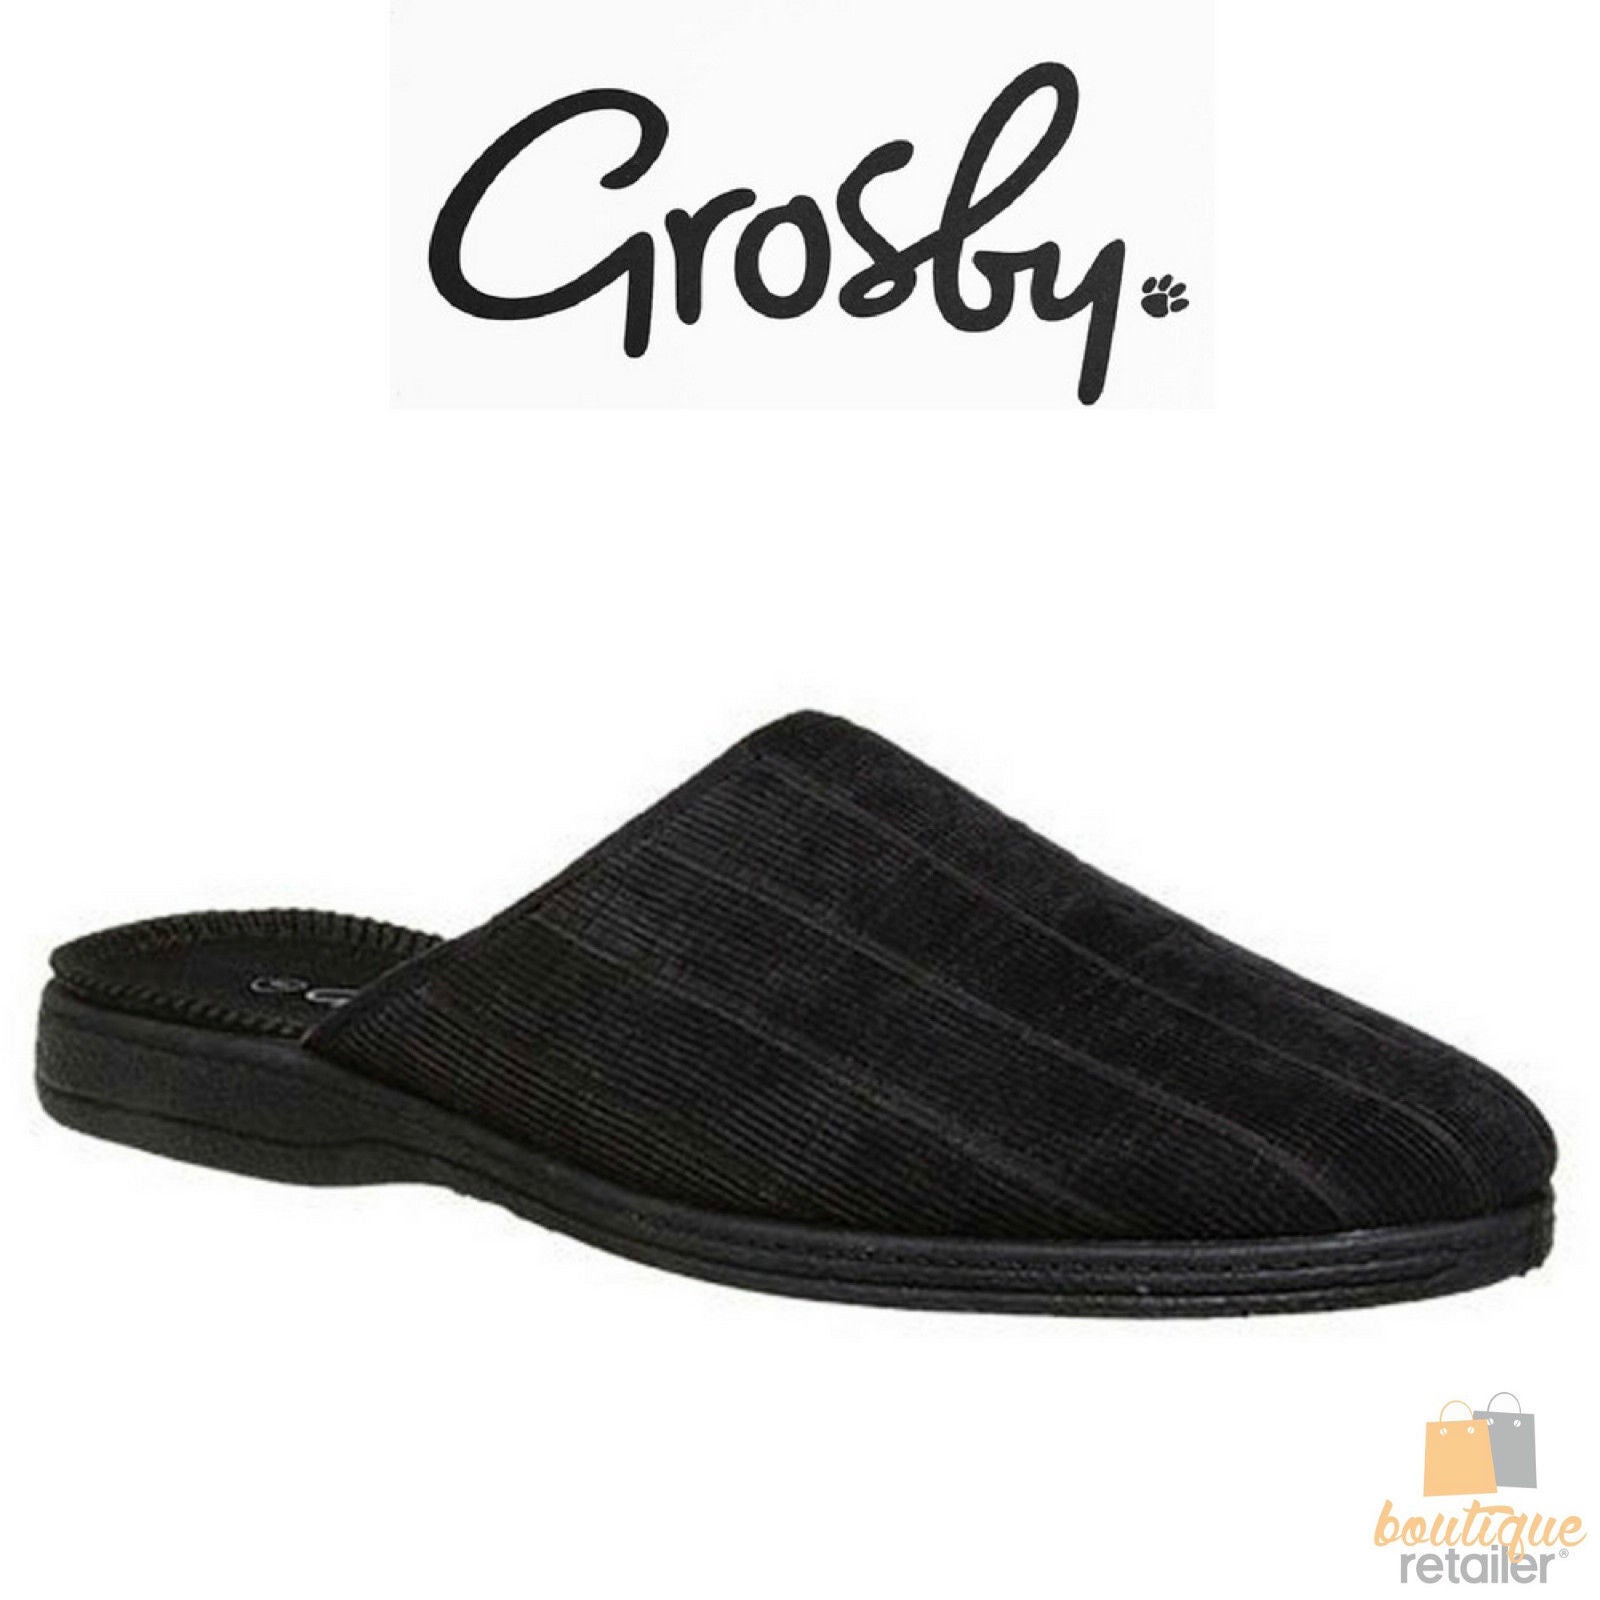 grosby slippers target